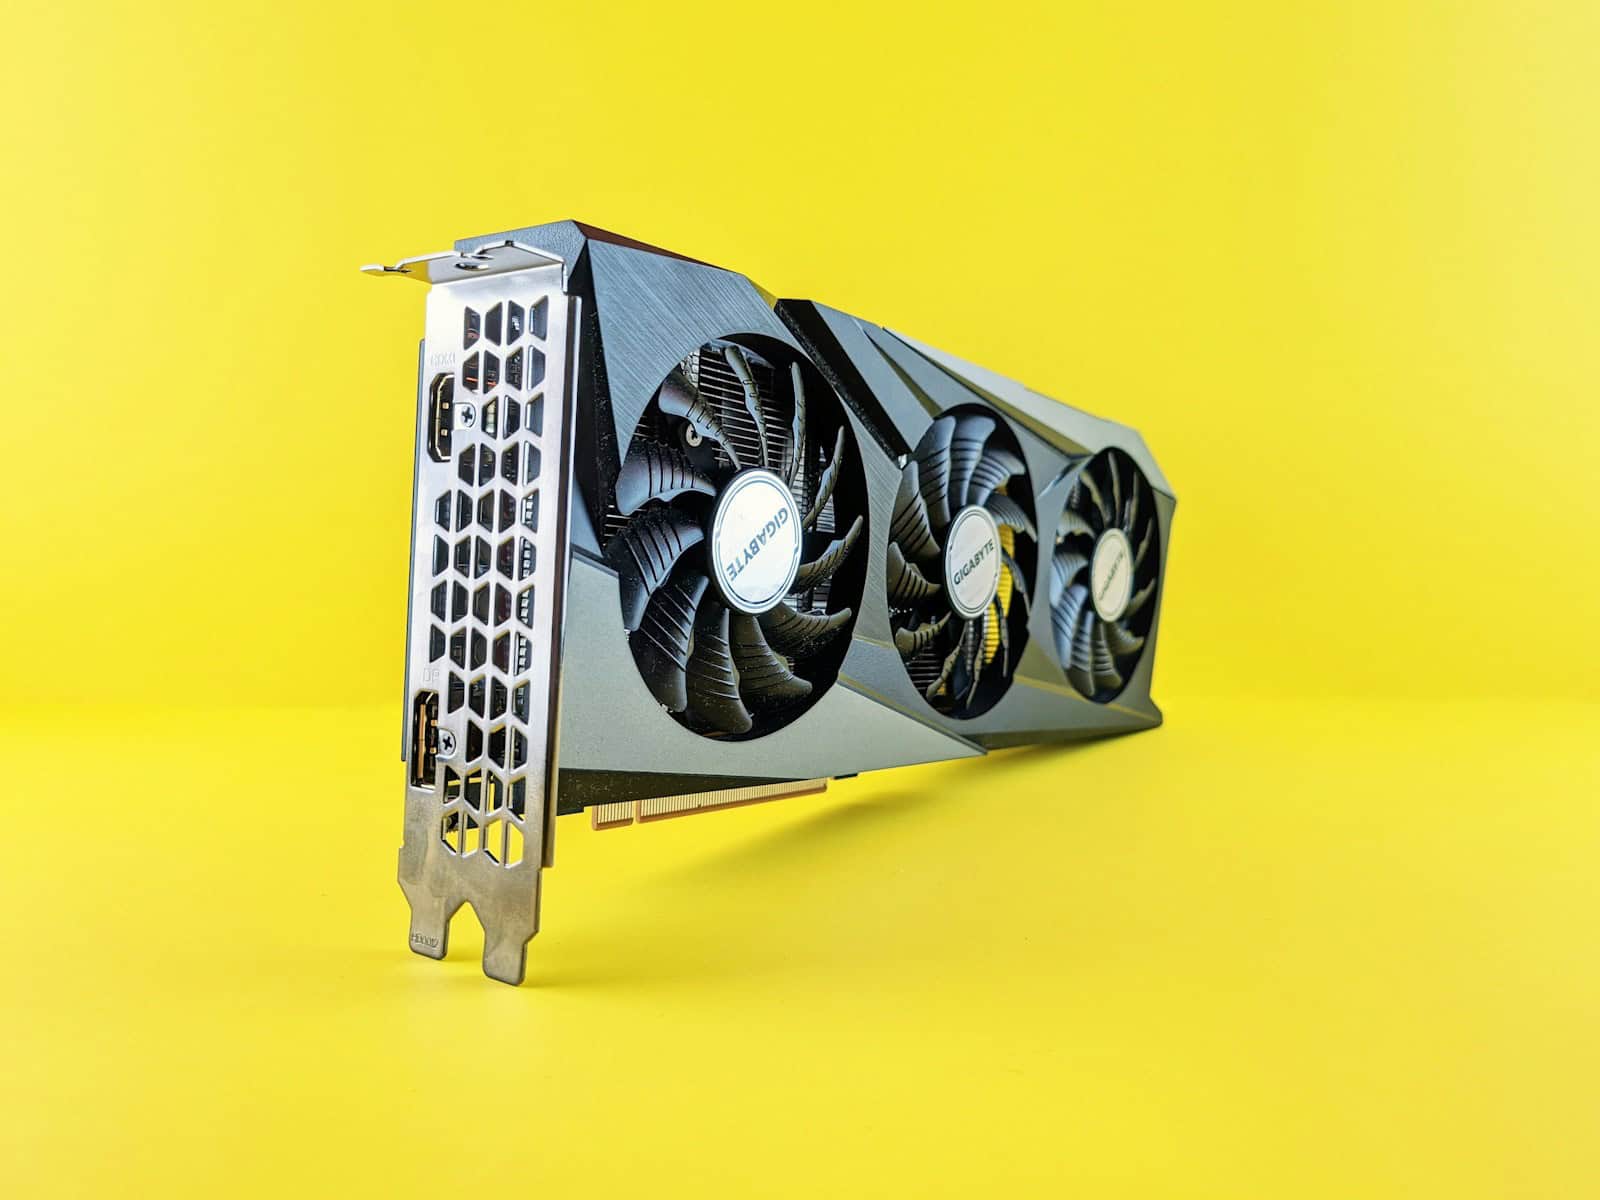 a close up of a computer fan on a yellow background